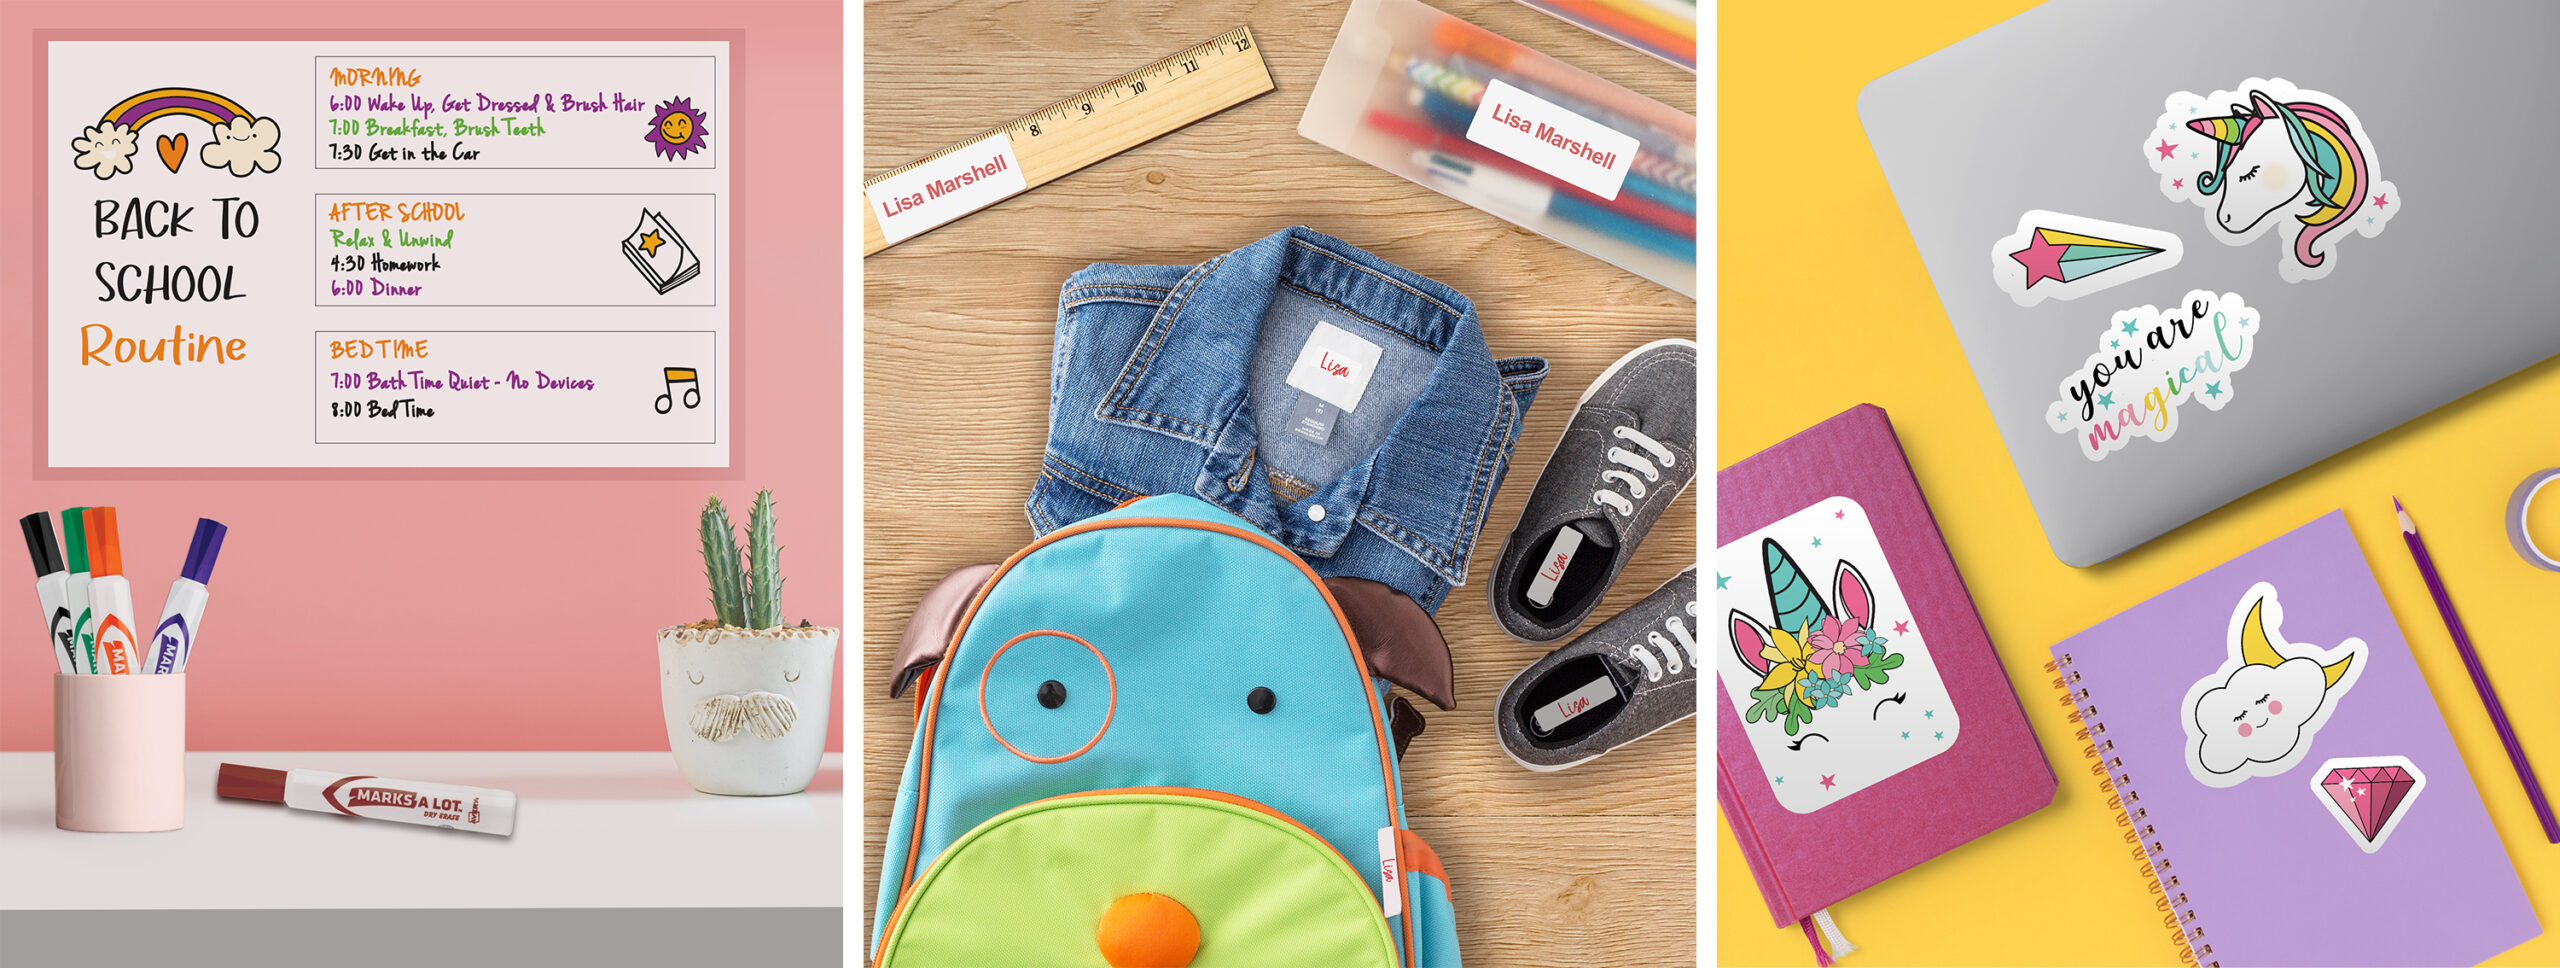 21 Practical Back To School Supplies Every Kid Should Have